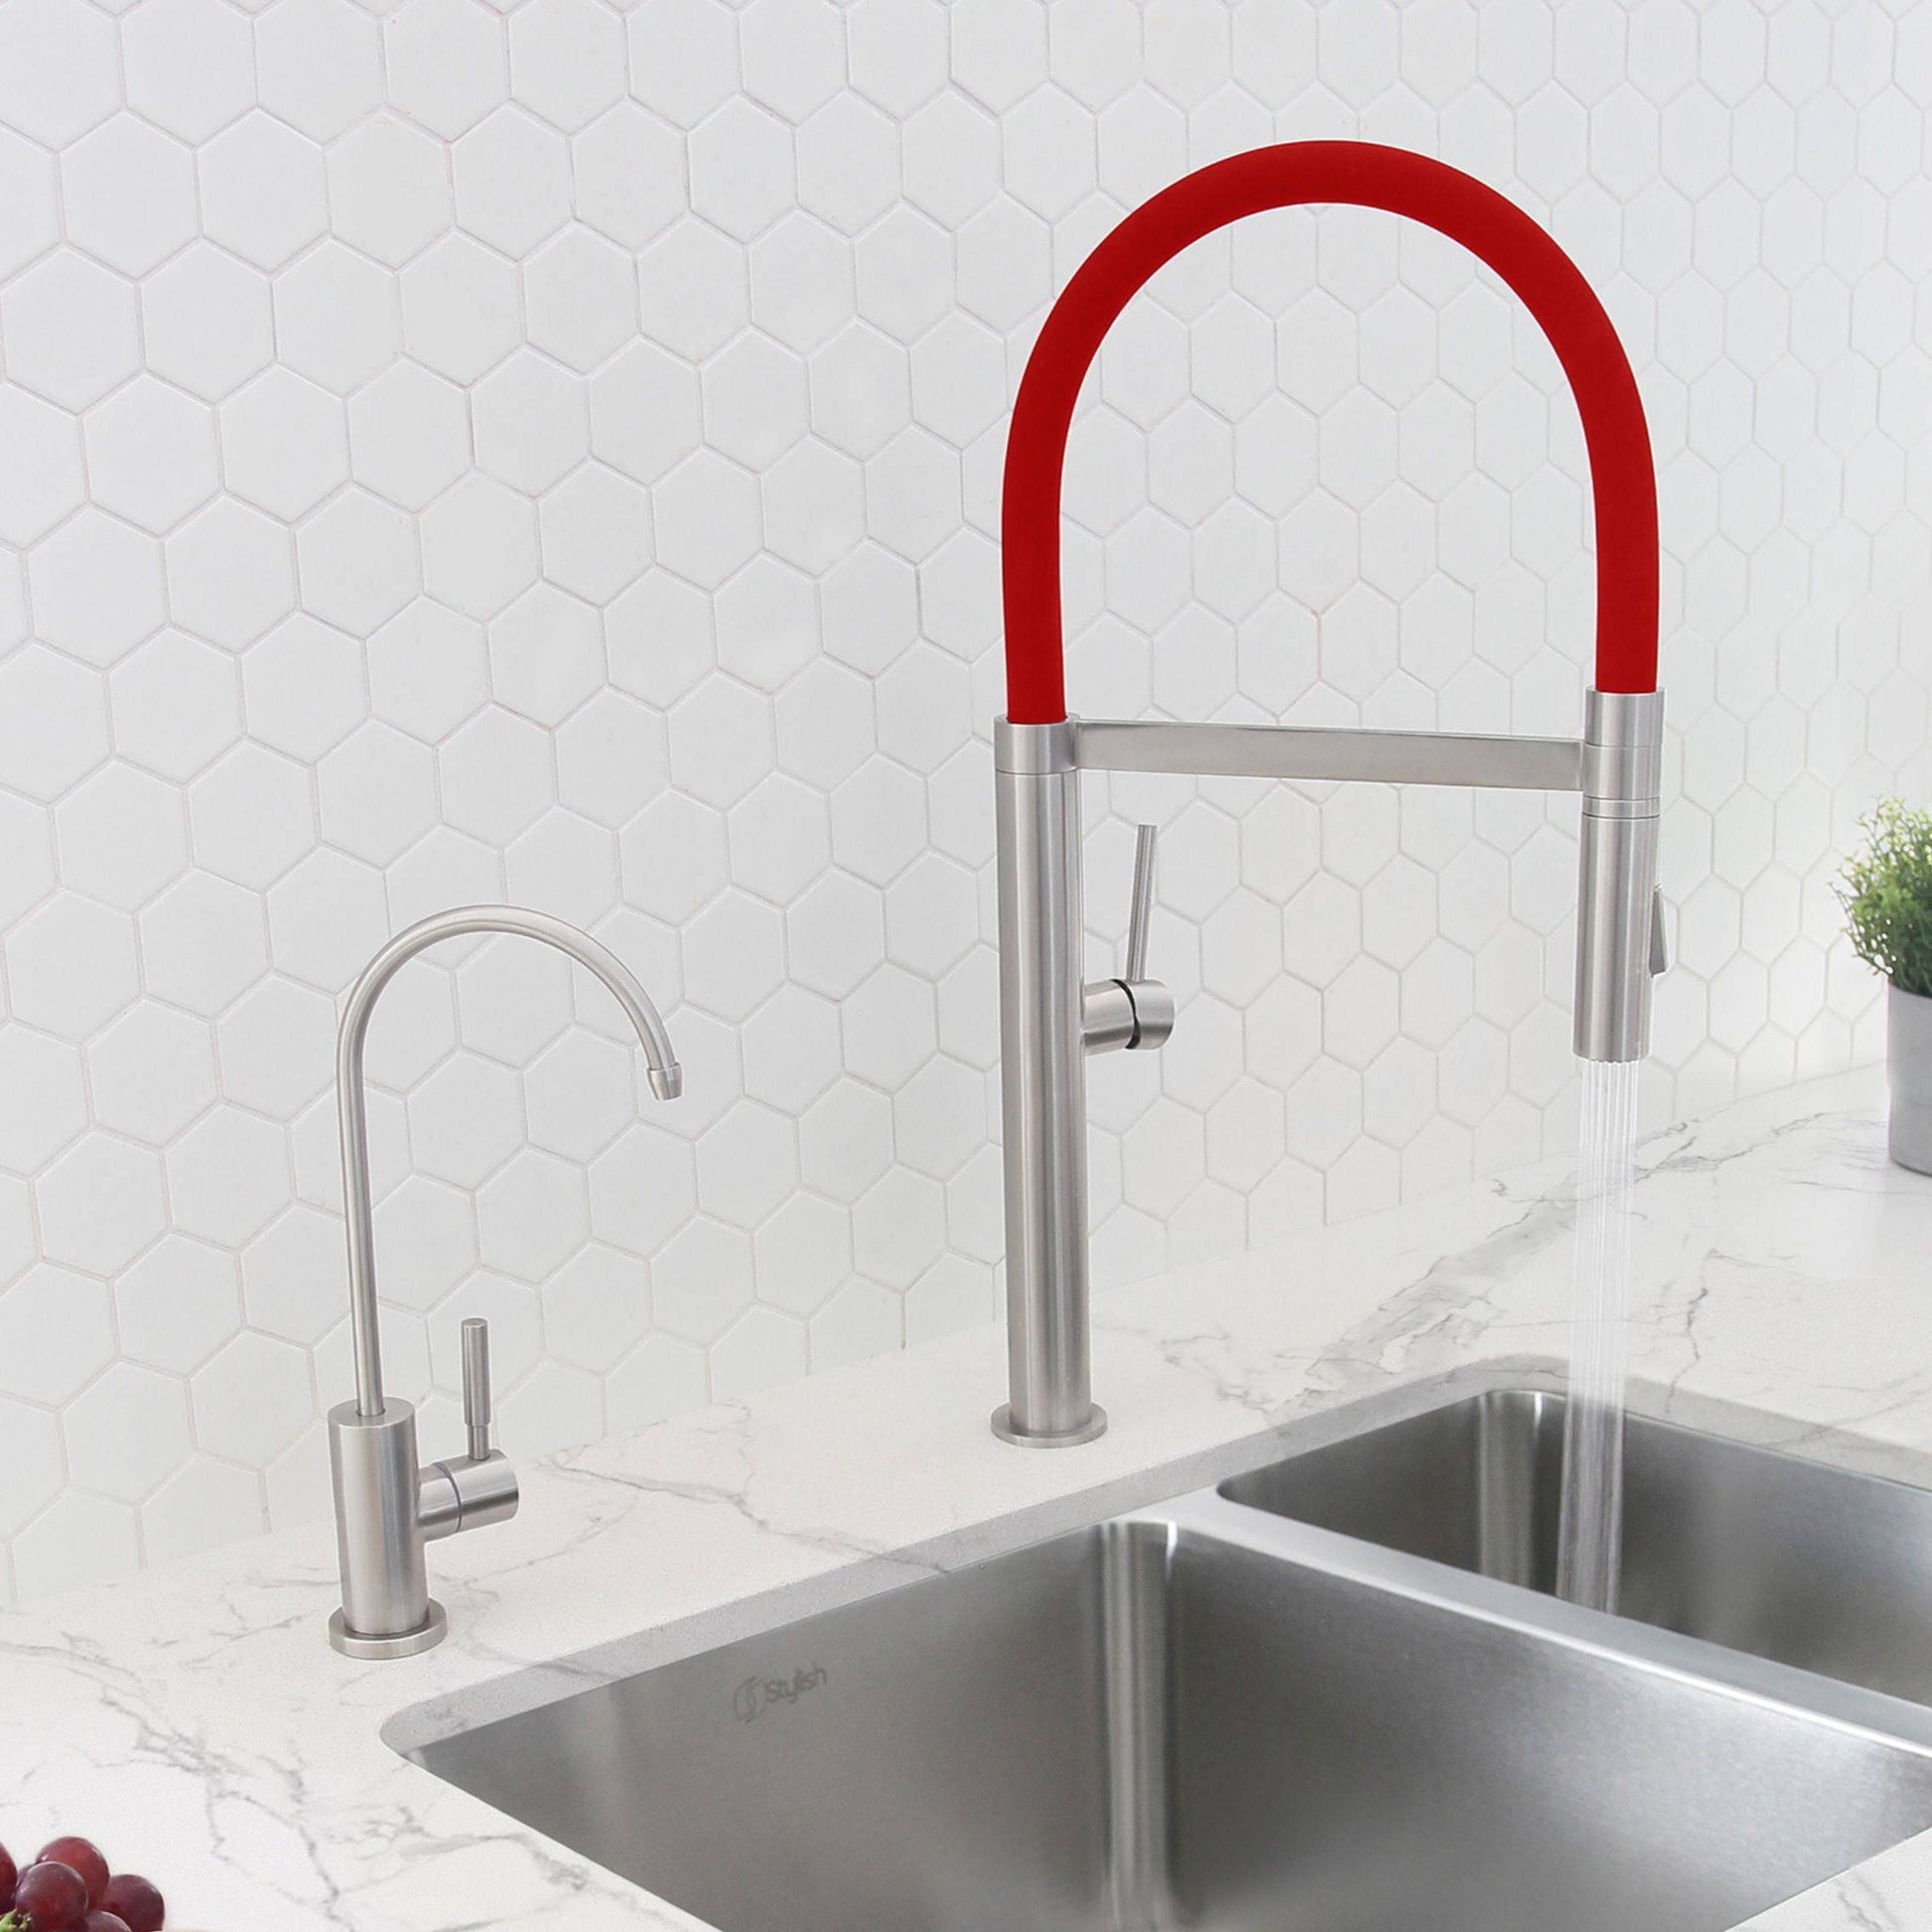 Stylish Carpi 20" Stainless Steel Single Handle Pull Out Dual Mode Kitchen Faucet with Red Spout Hose K-140R - Renoz